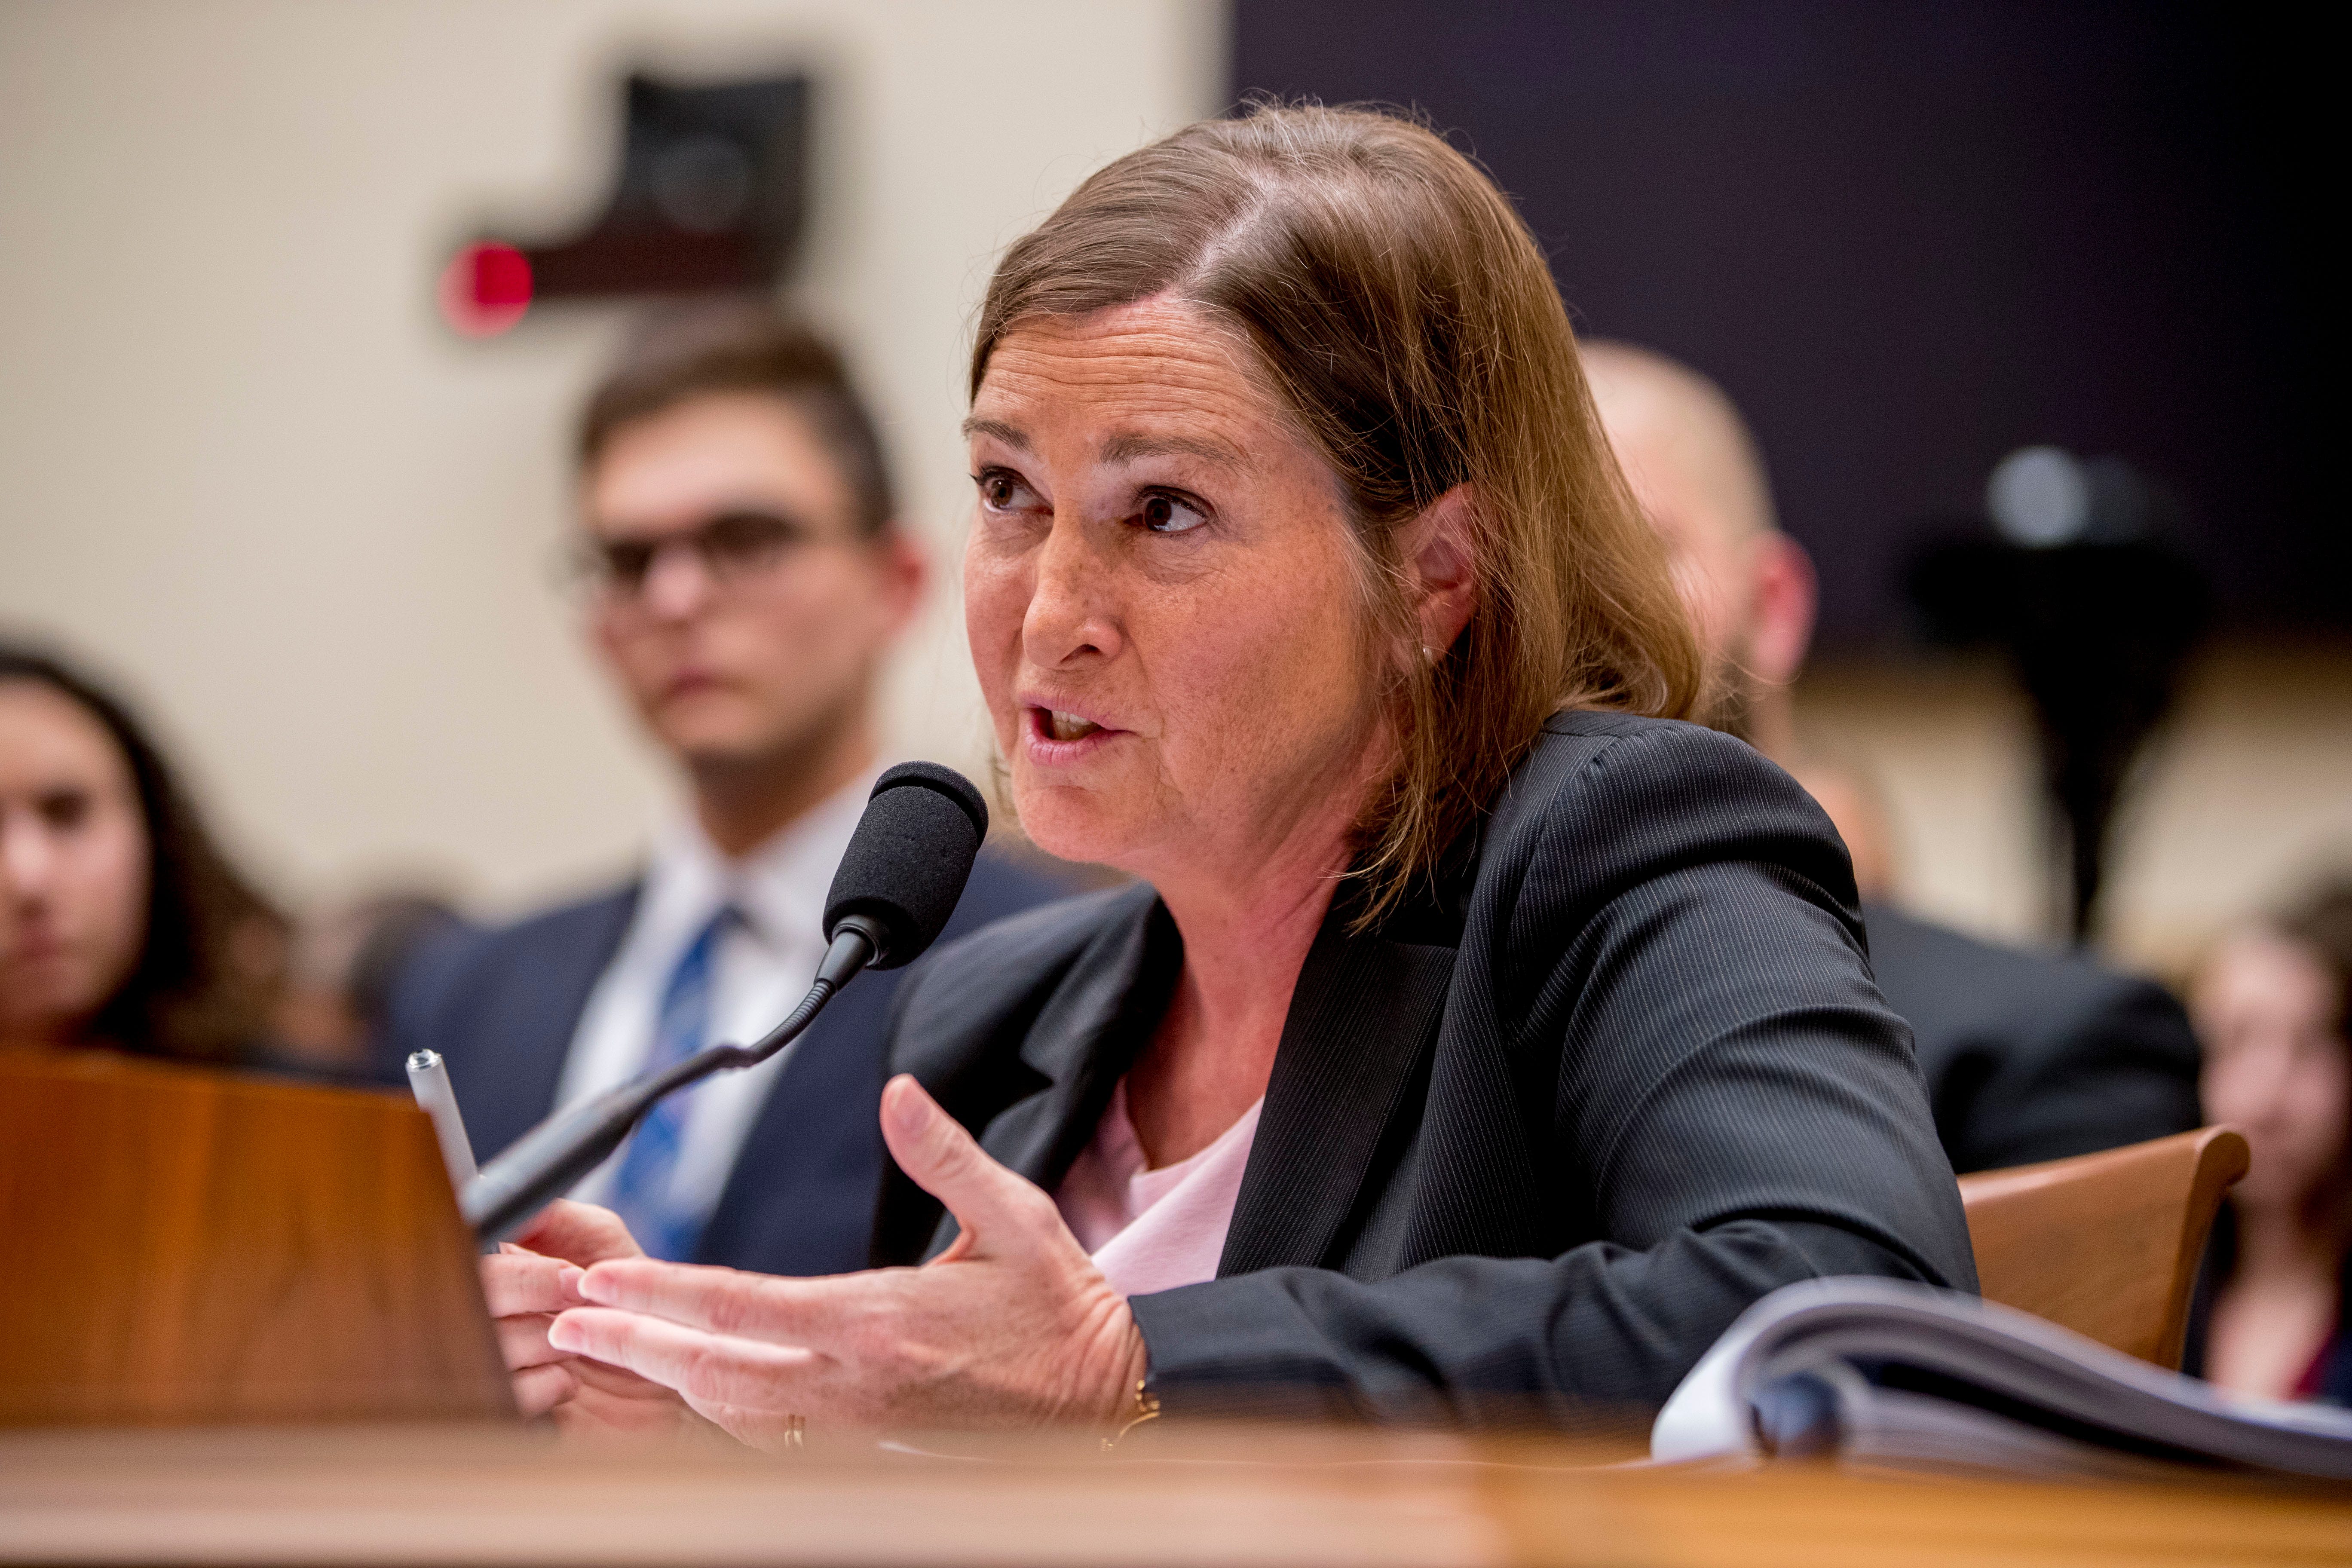 Former U.S. Attorney for the Eastern District of Michigan Barbara McQuade speaks at a House Judiciary Committee hearing on the Mueller Report on Capitol Hill in Washington, Monday, June 10, 2019.